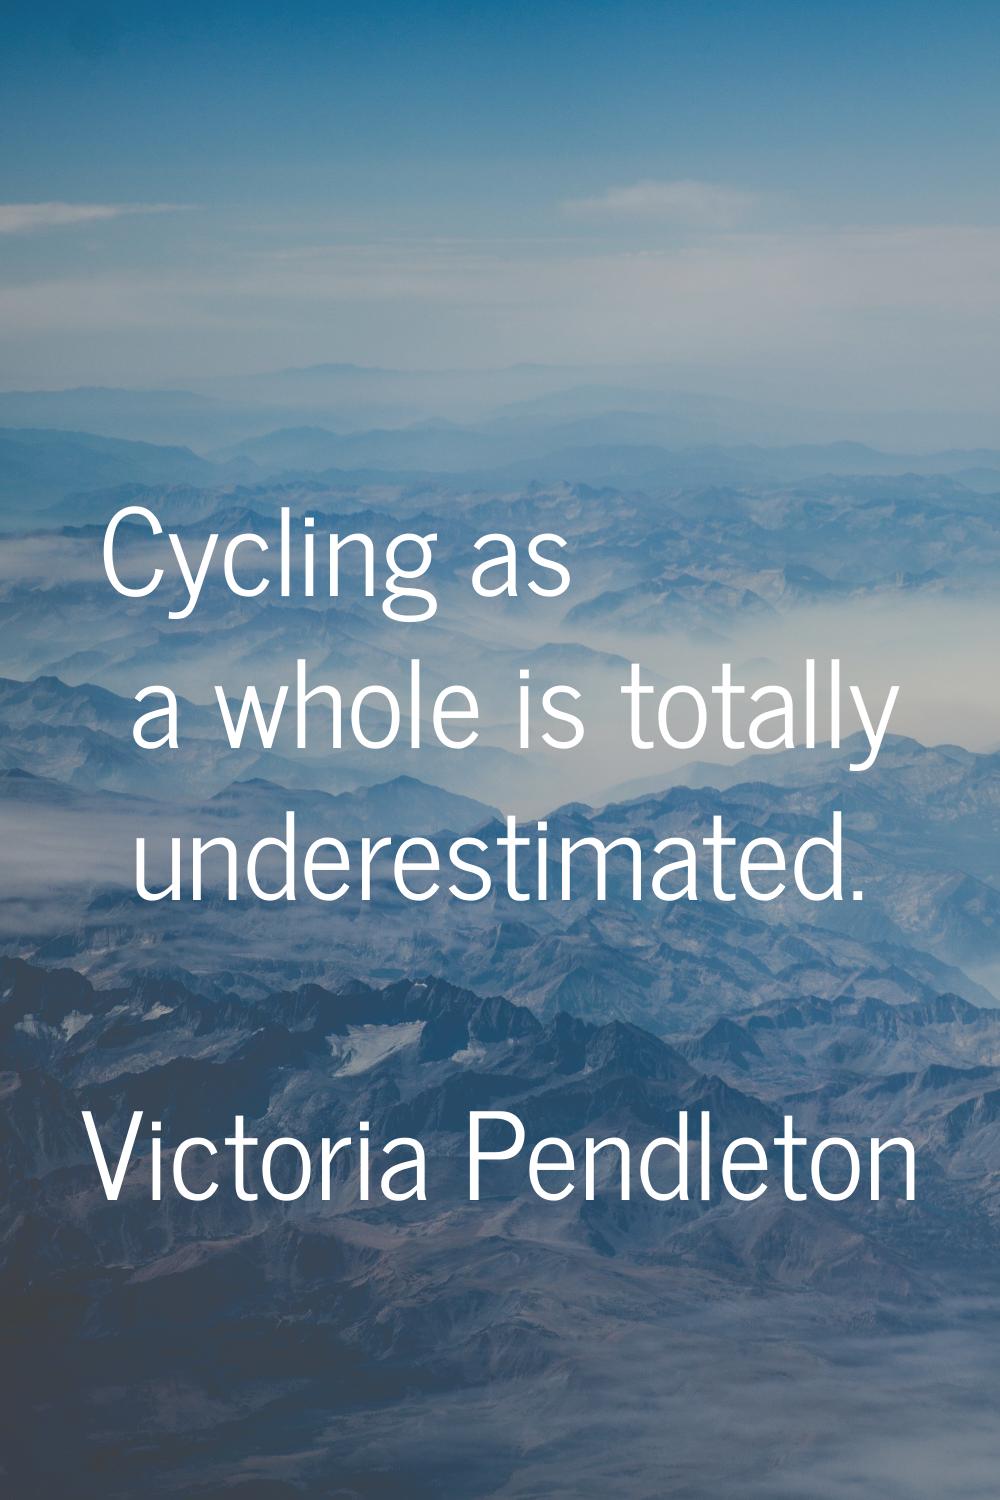 Cycling as a whole is totally underestimated.